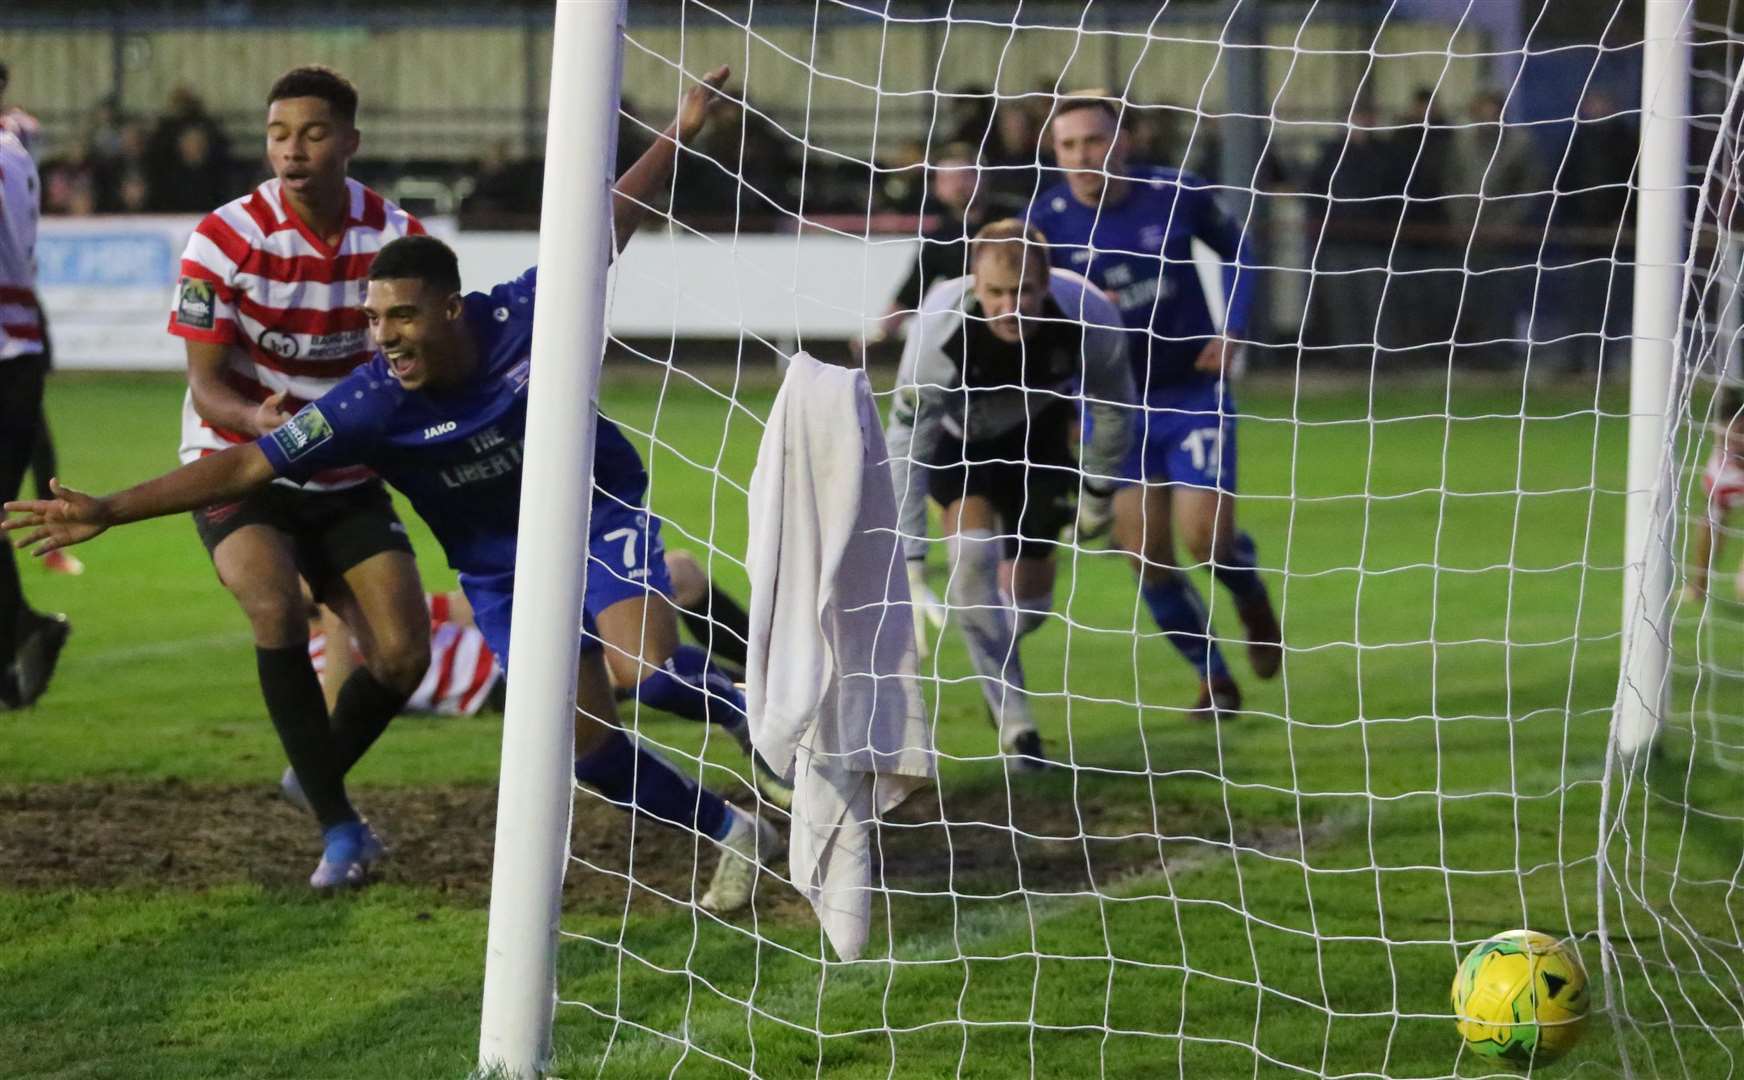 Margate's George Brown wheels away after scoring the equaliser at Kingstonian on Saturday Picture: Don Walker